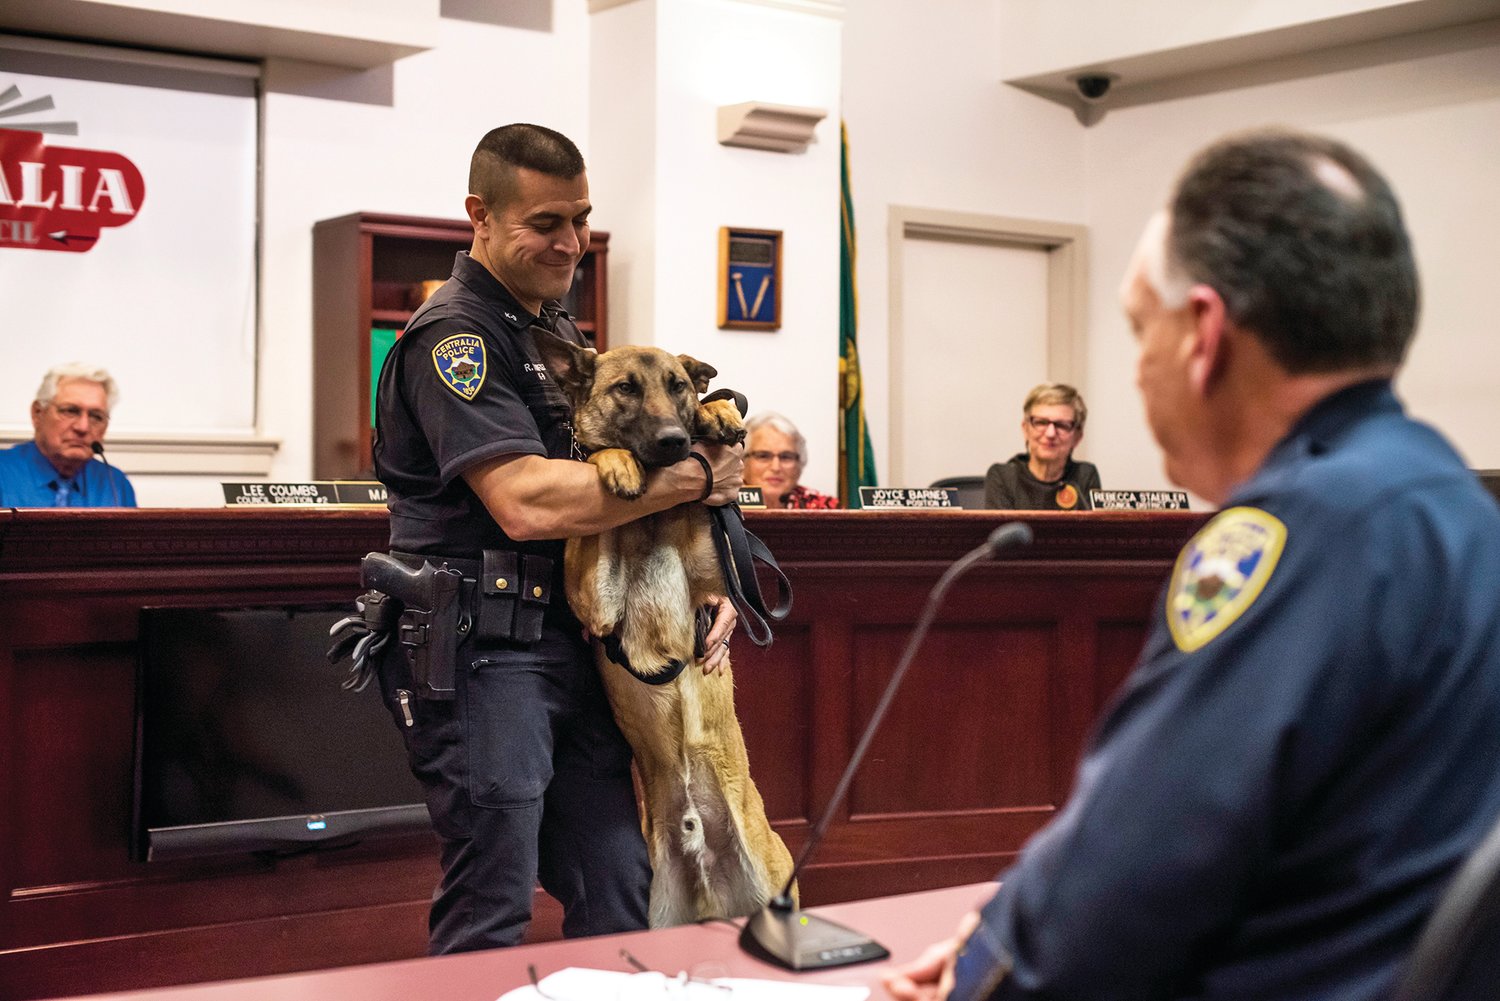 Officer Reuben Ramirez shows off his new K9 partner, Pax, during the Centralia City Council meeting in this Chronicle file photo.